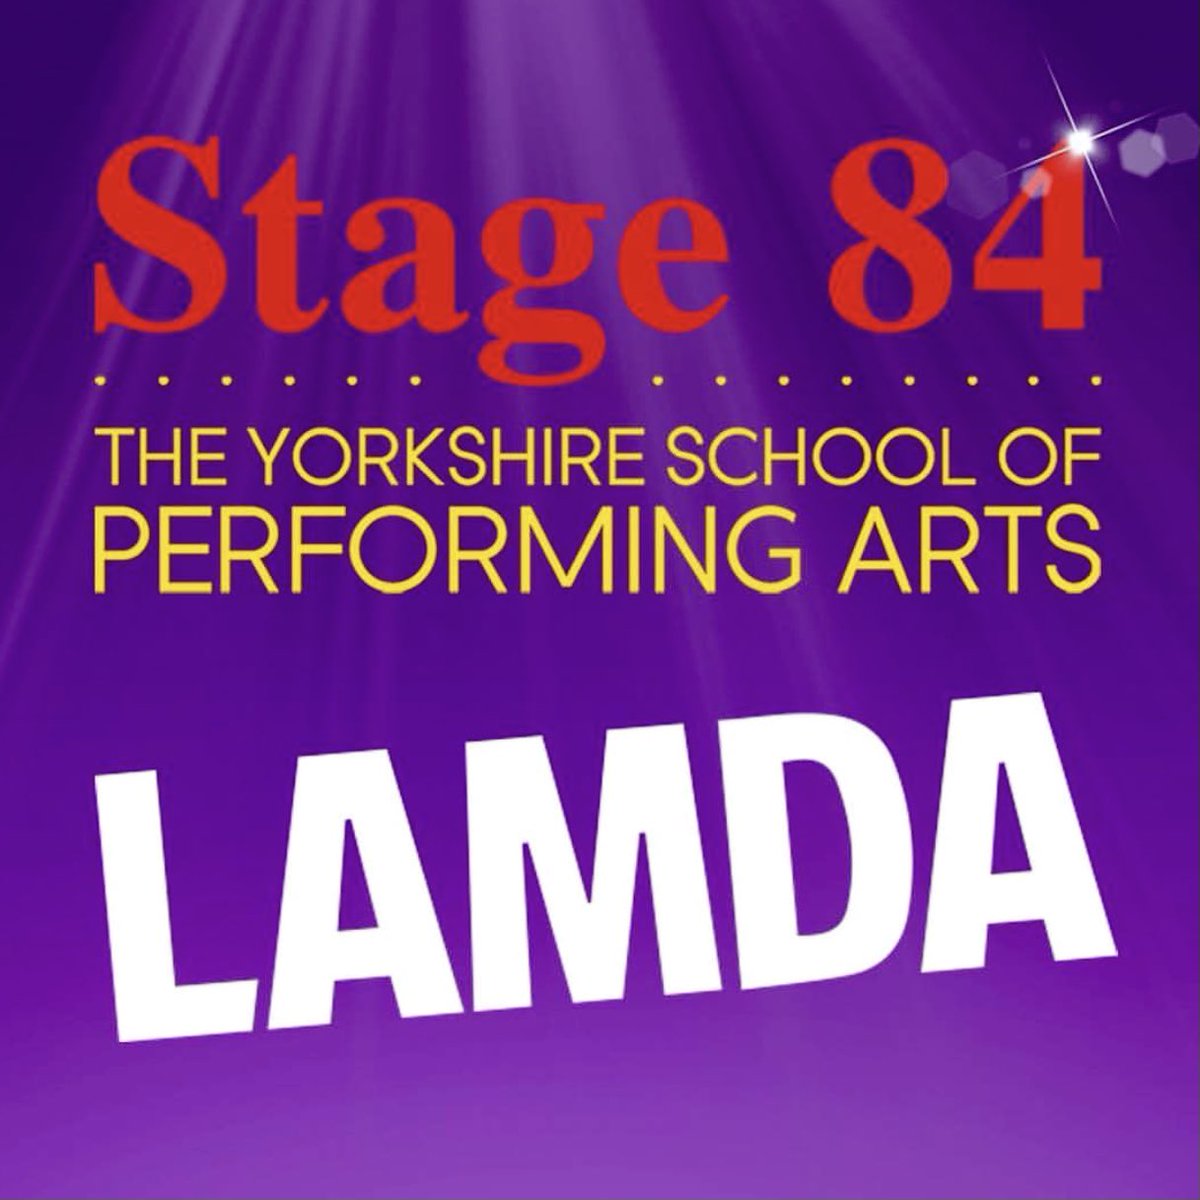 ‘Break a leg' to all our Singing students taking their annual Musical Theatre examinations with the LAMDA examination board today/tomorrow!

#stage84 #lamda #singing #examinations #musicaltheatre #musicals #theatre #performance #qualifications #achievement #exams